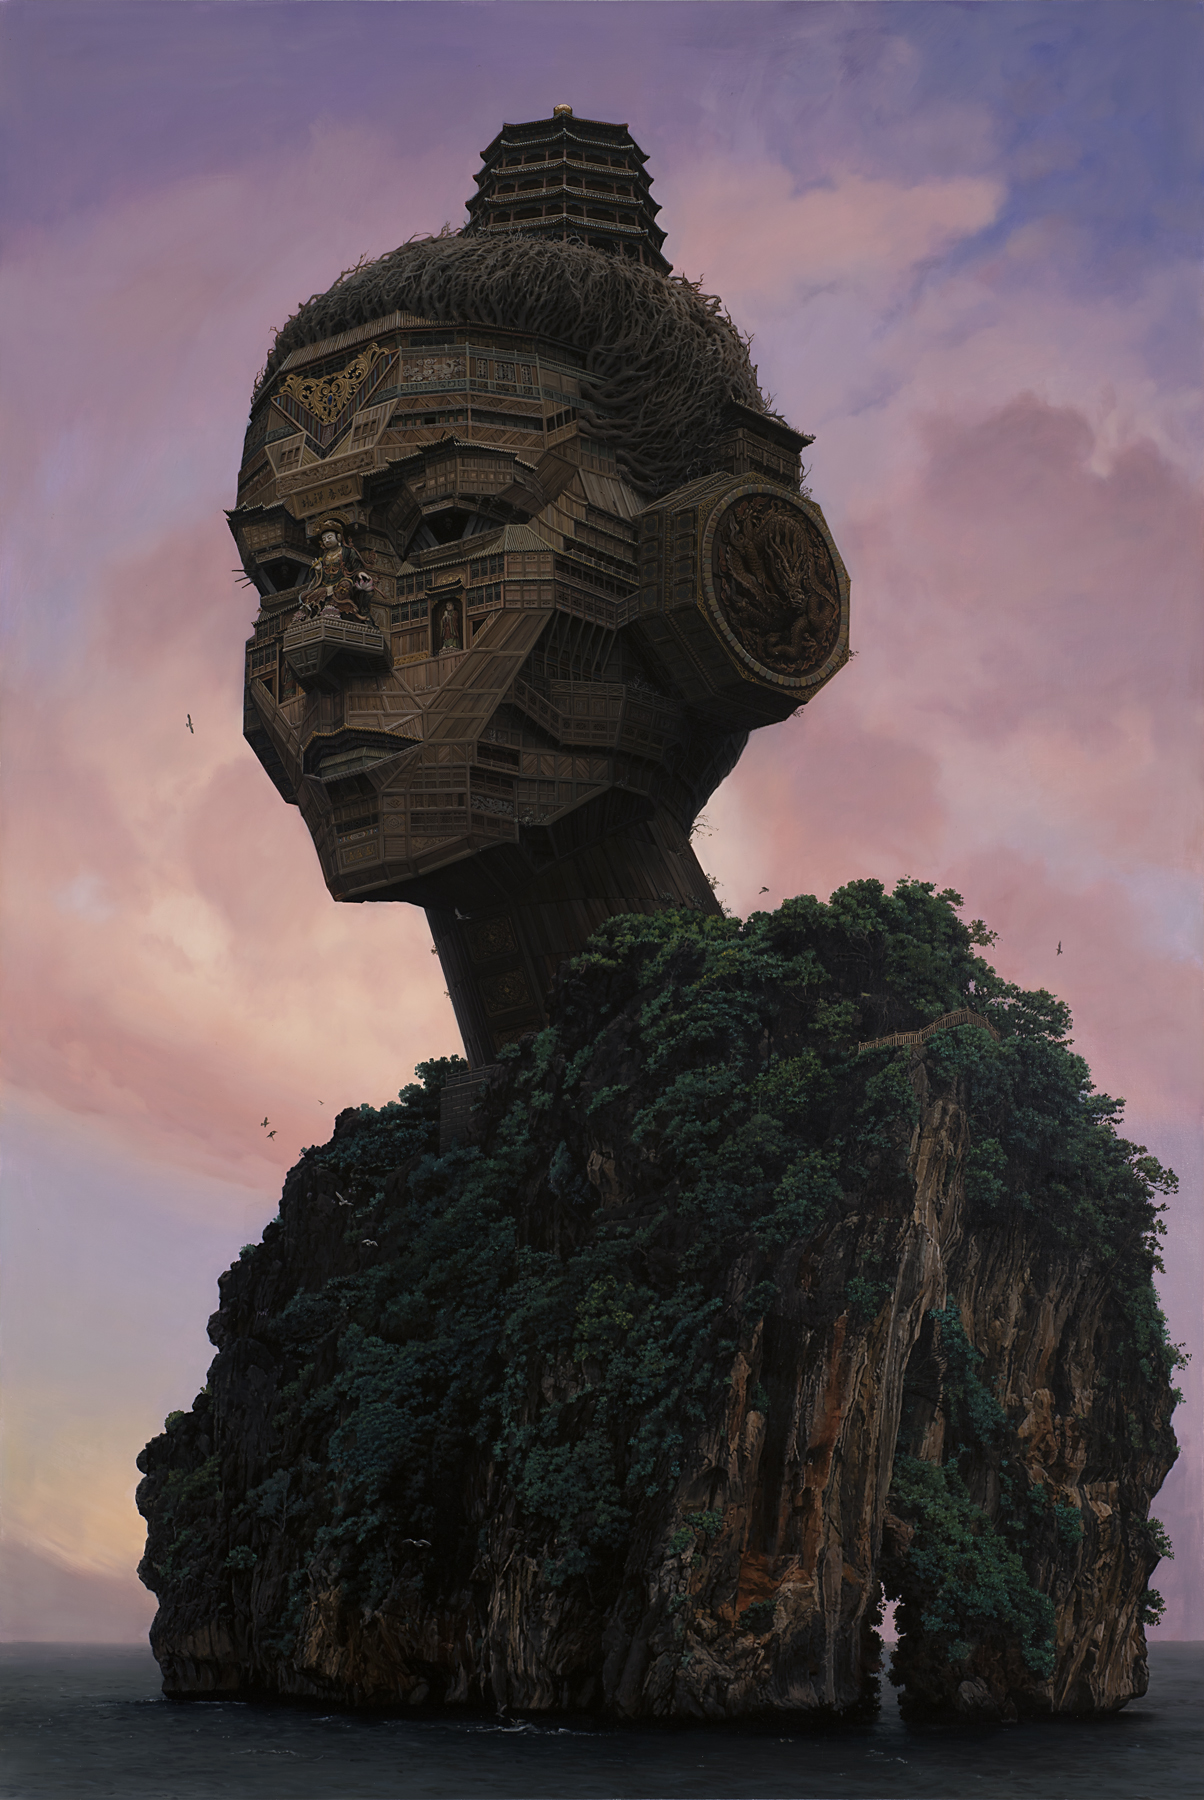 An intricate wooden temple shaped like a woman’s head is perched atop a rocky island nearly covered with green plants 